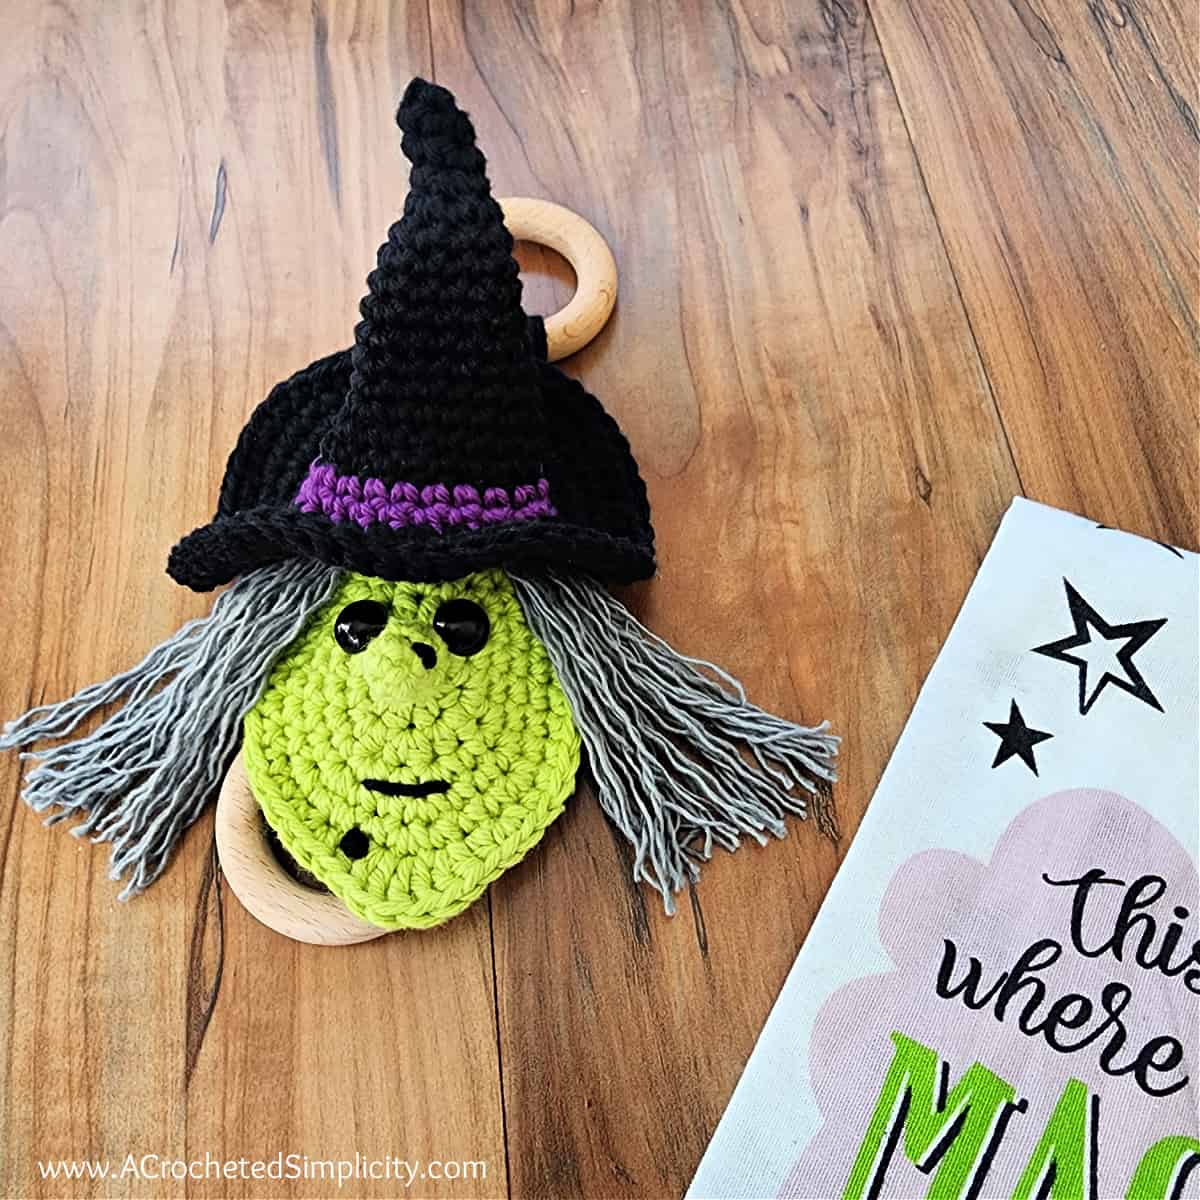 Witch crochet towel ring holder with ring laying on wooden floor